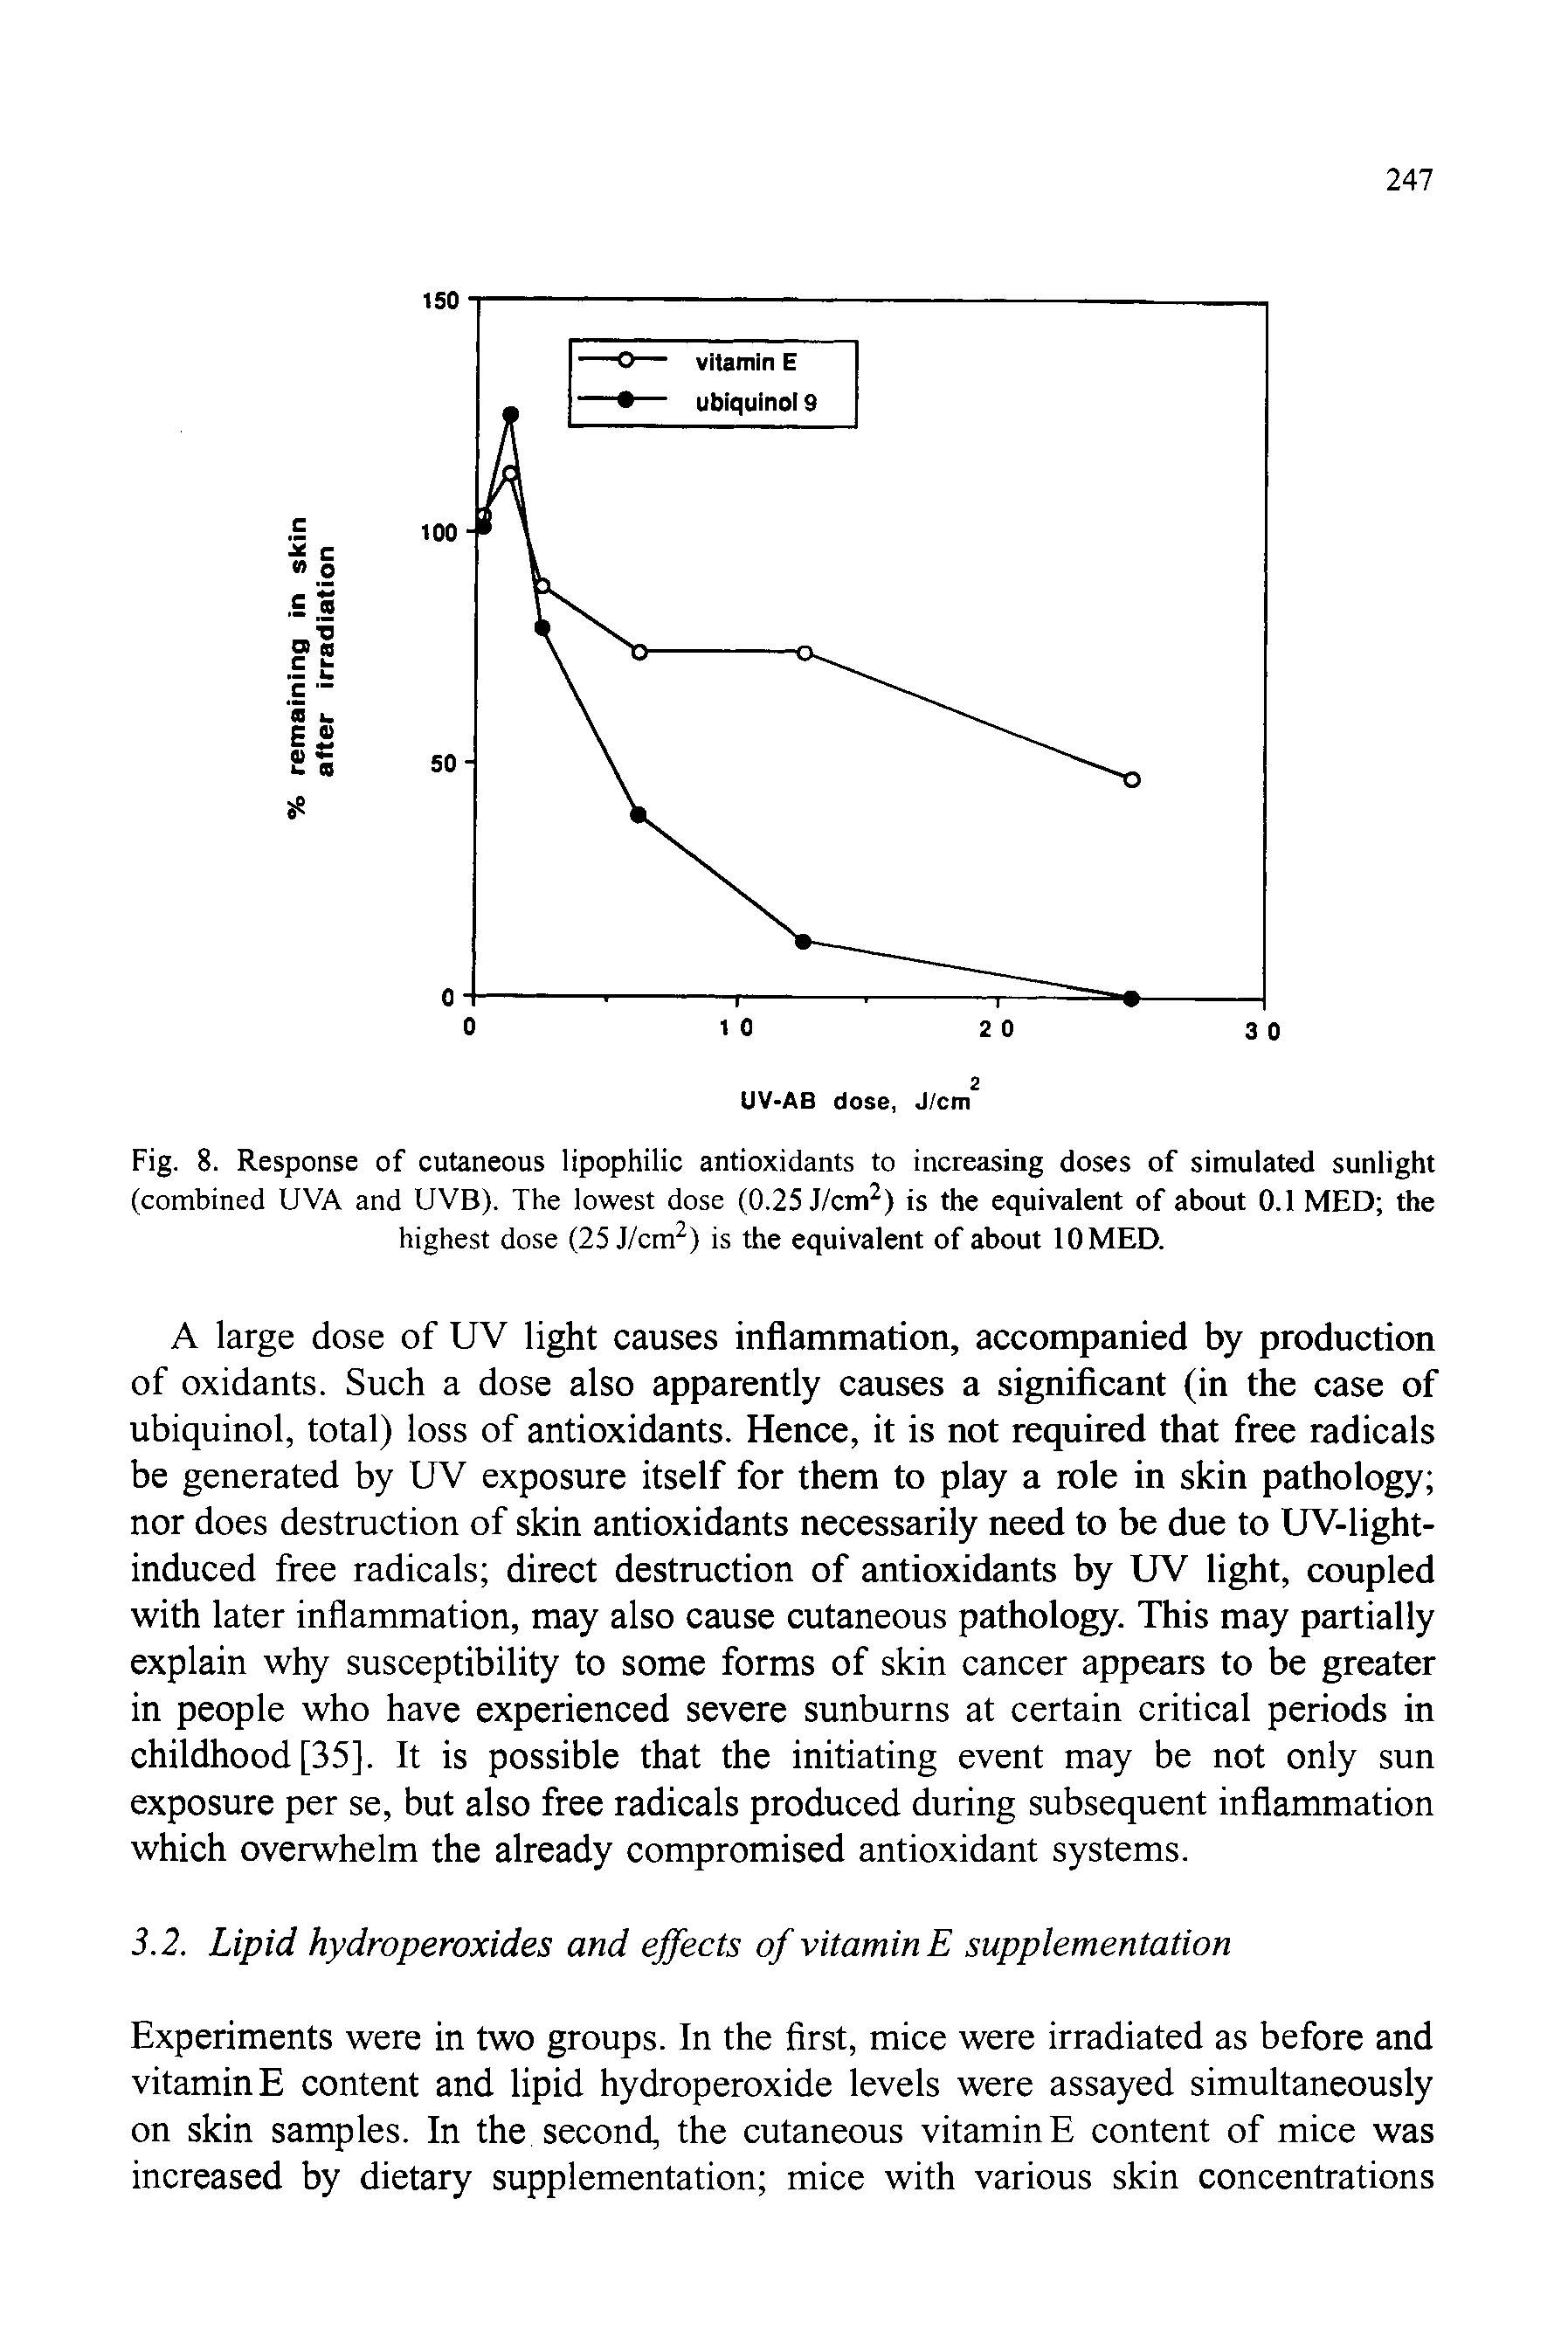 Fig. 8. Response of cutaneous lipophilic antioxidants to increasing doses of simulated sunlight (combined UVA and UVB). The lowest dose (0.25 J/cm2) is the equivalent of about 0.1 MED the highest dose (25 J/cm2) is the equivalent of about 10MED.